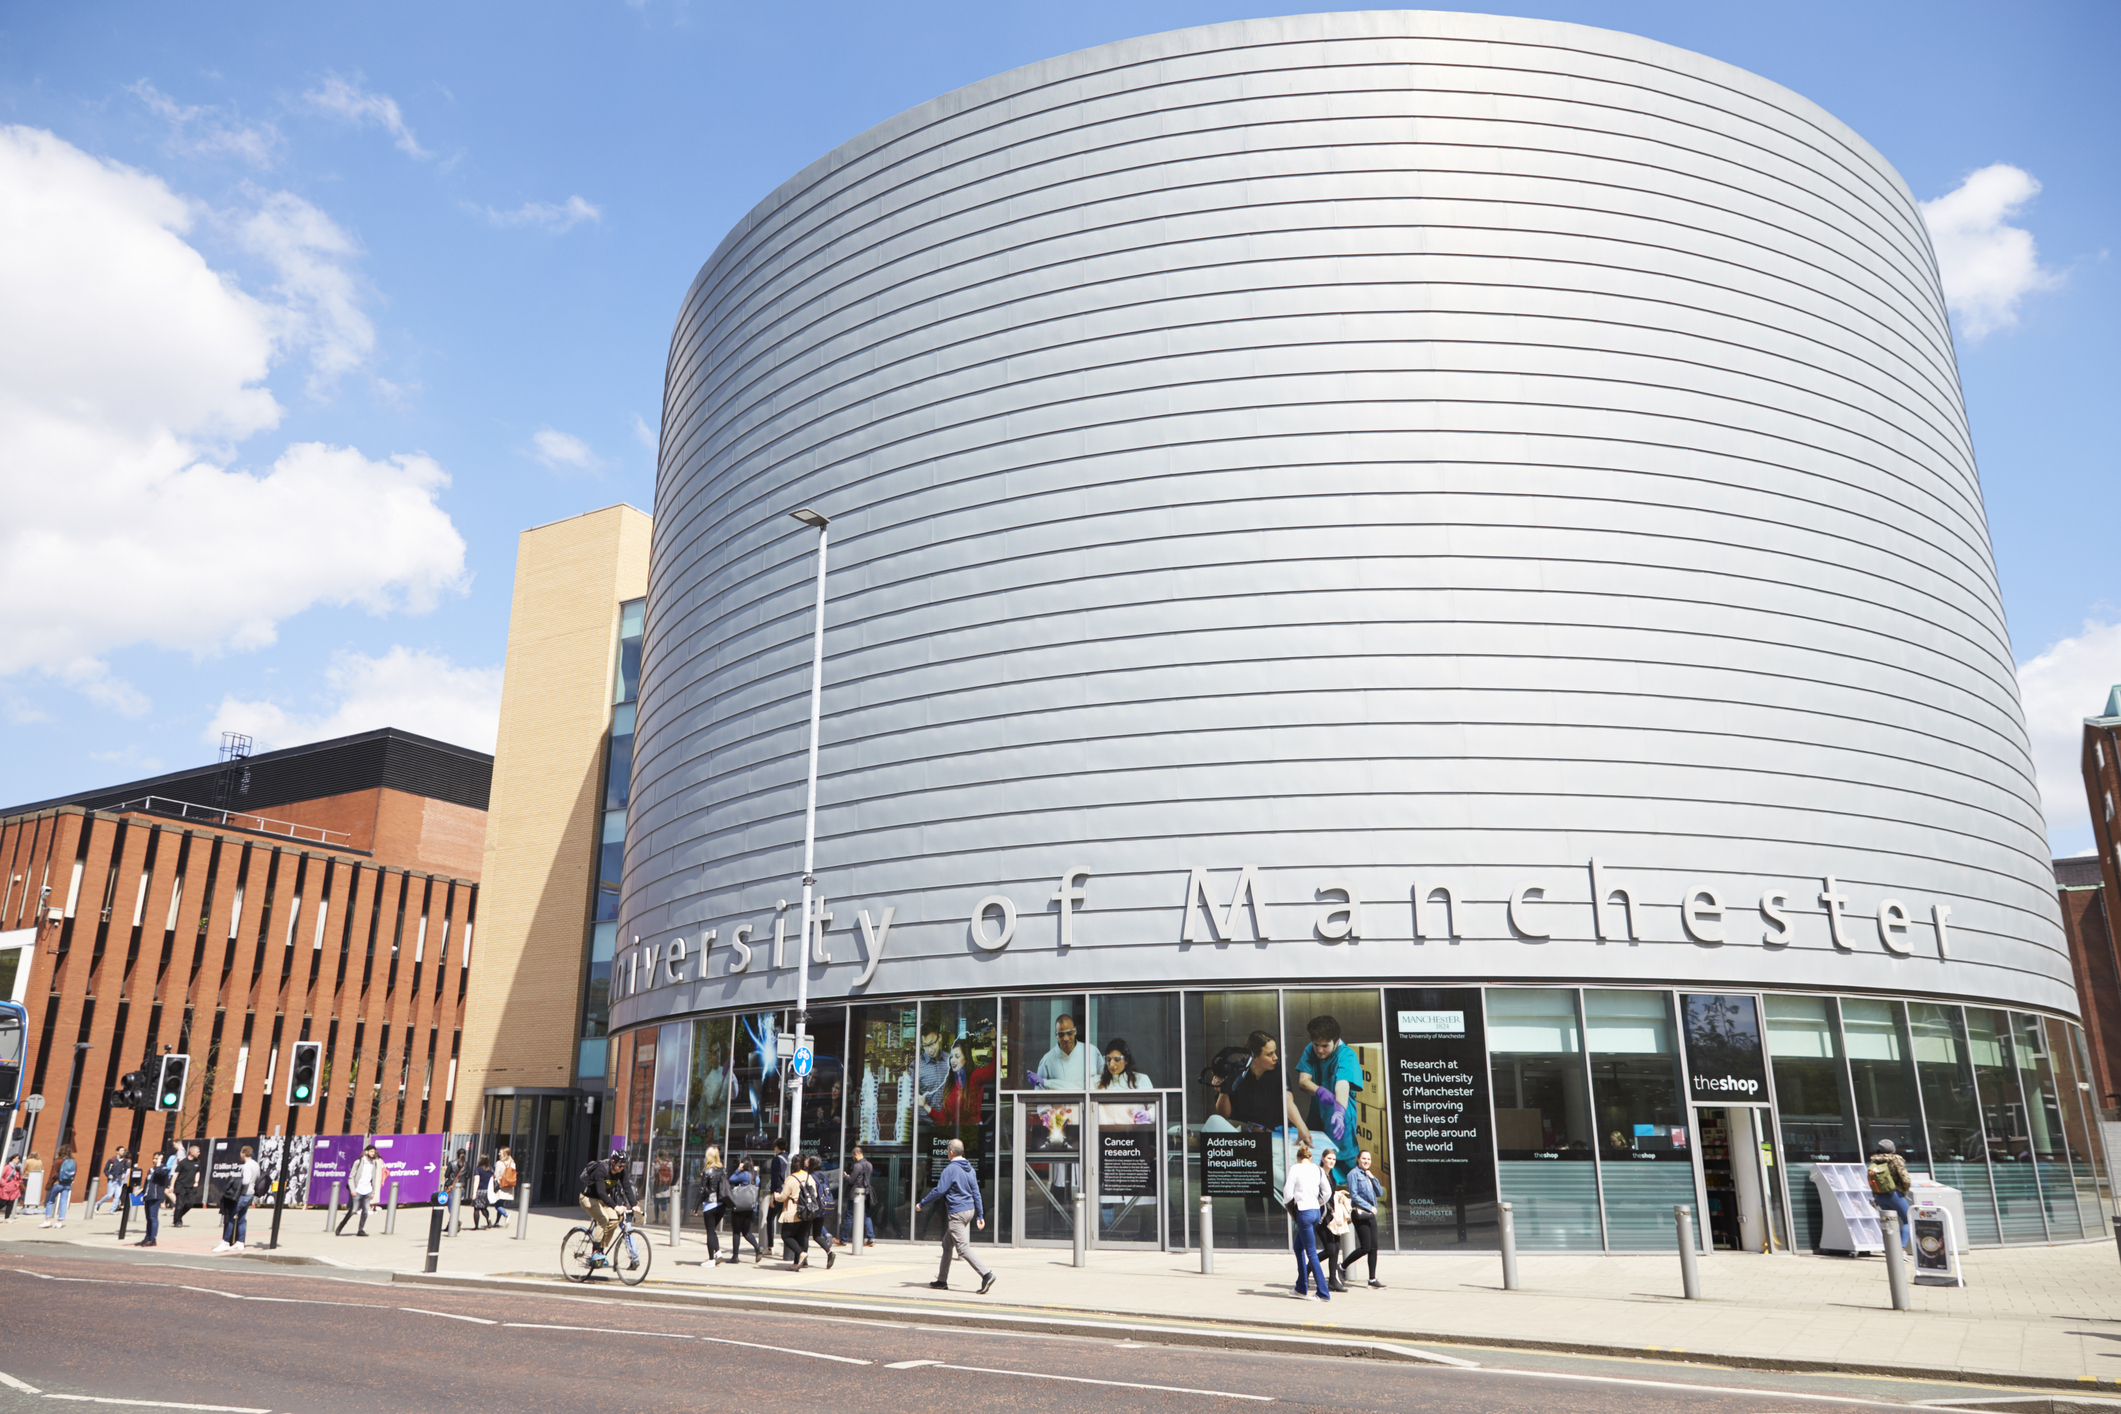 The University of Manchester is one of the partners in the multi-stakeholder collaboration Health Innovation Manchester